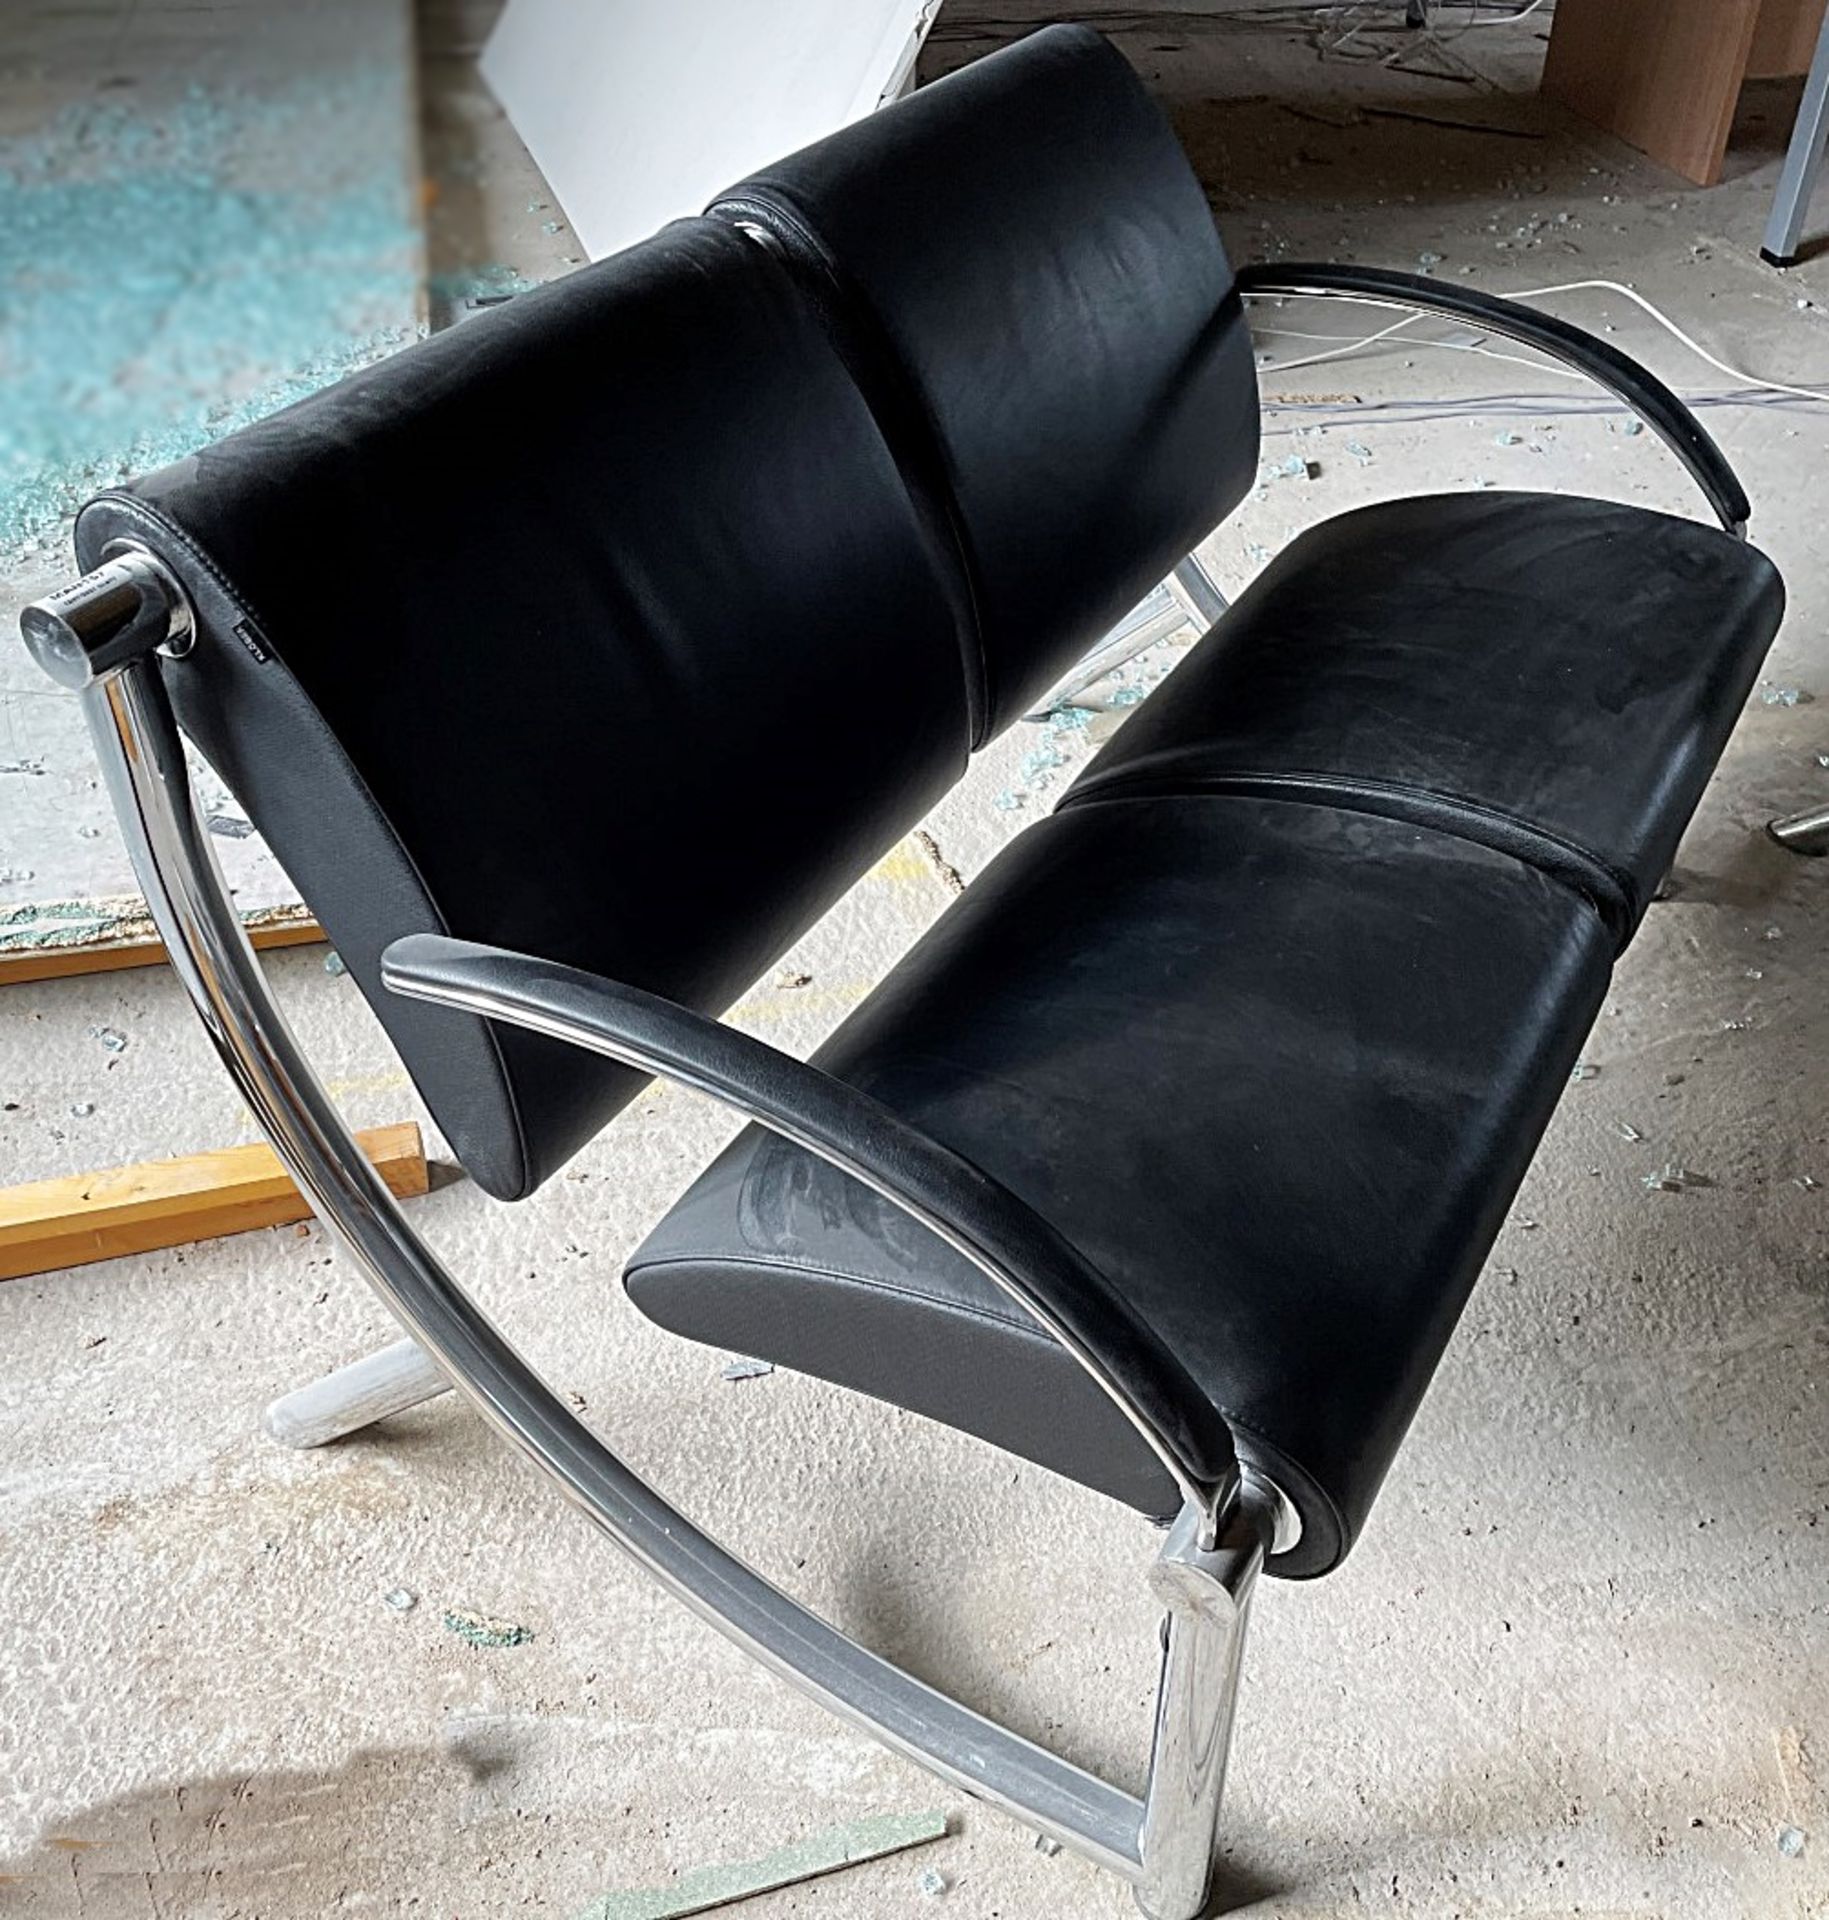 1 x Klöber Tezett Designer 2-Seater Sofa In Black Leather And Chrome With Arms - Made In Germany - - Image 3 of 4